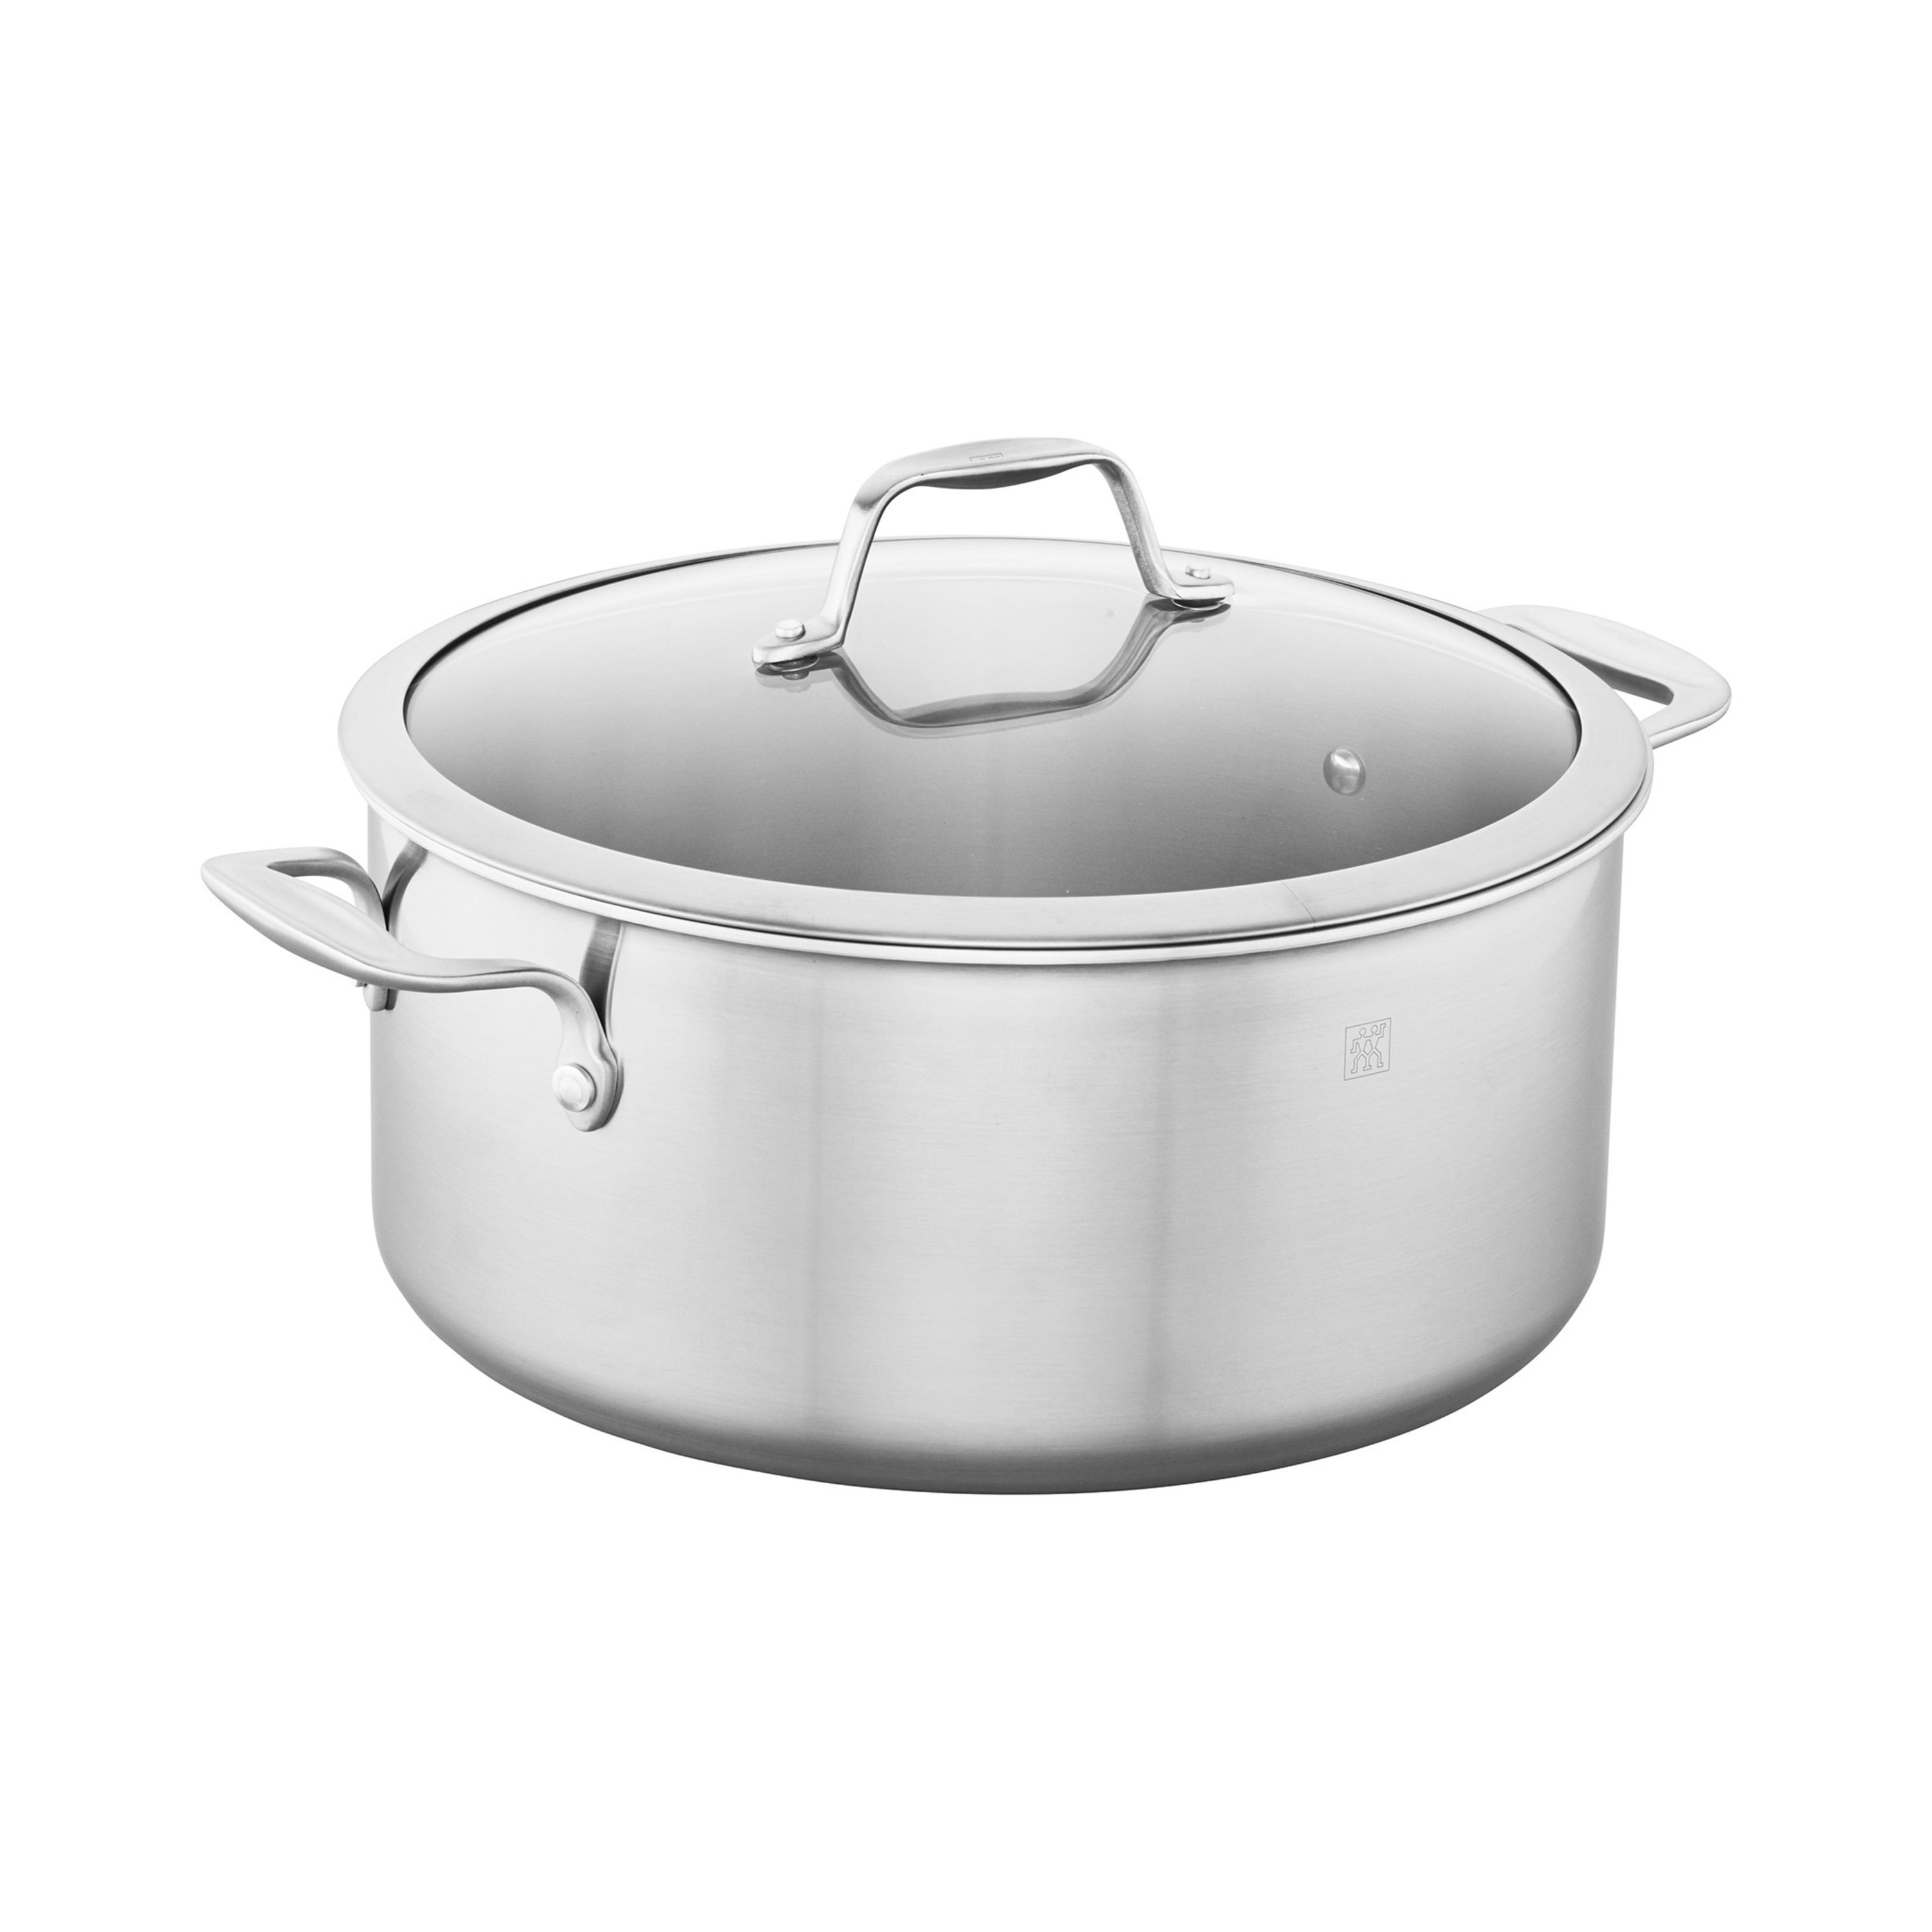  Dutch Oven with Lid - Stainless Steel Stock Pot with Lid - Large  Pot for Cooking - Big Soup Pot with Lid - Stainless Steel Cooking Pot -  Heavy Duty Induction